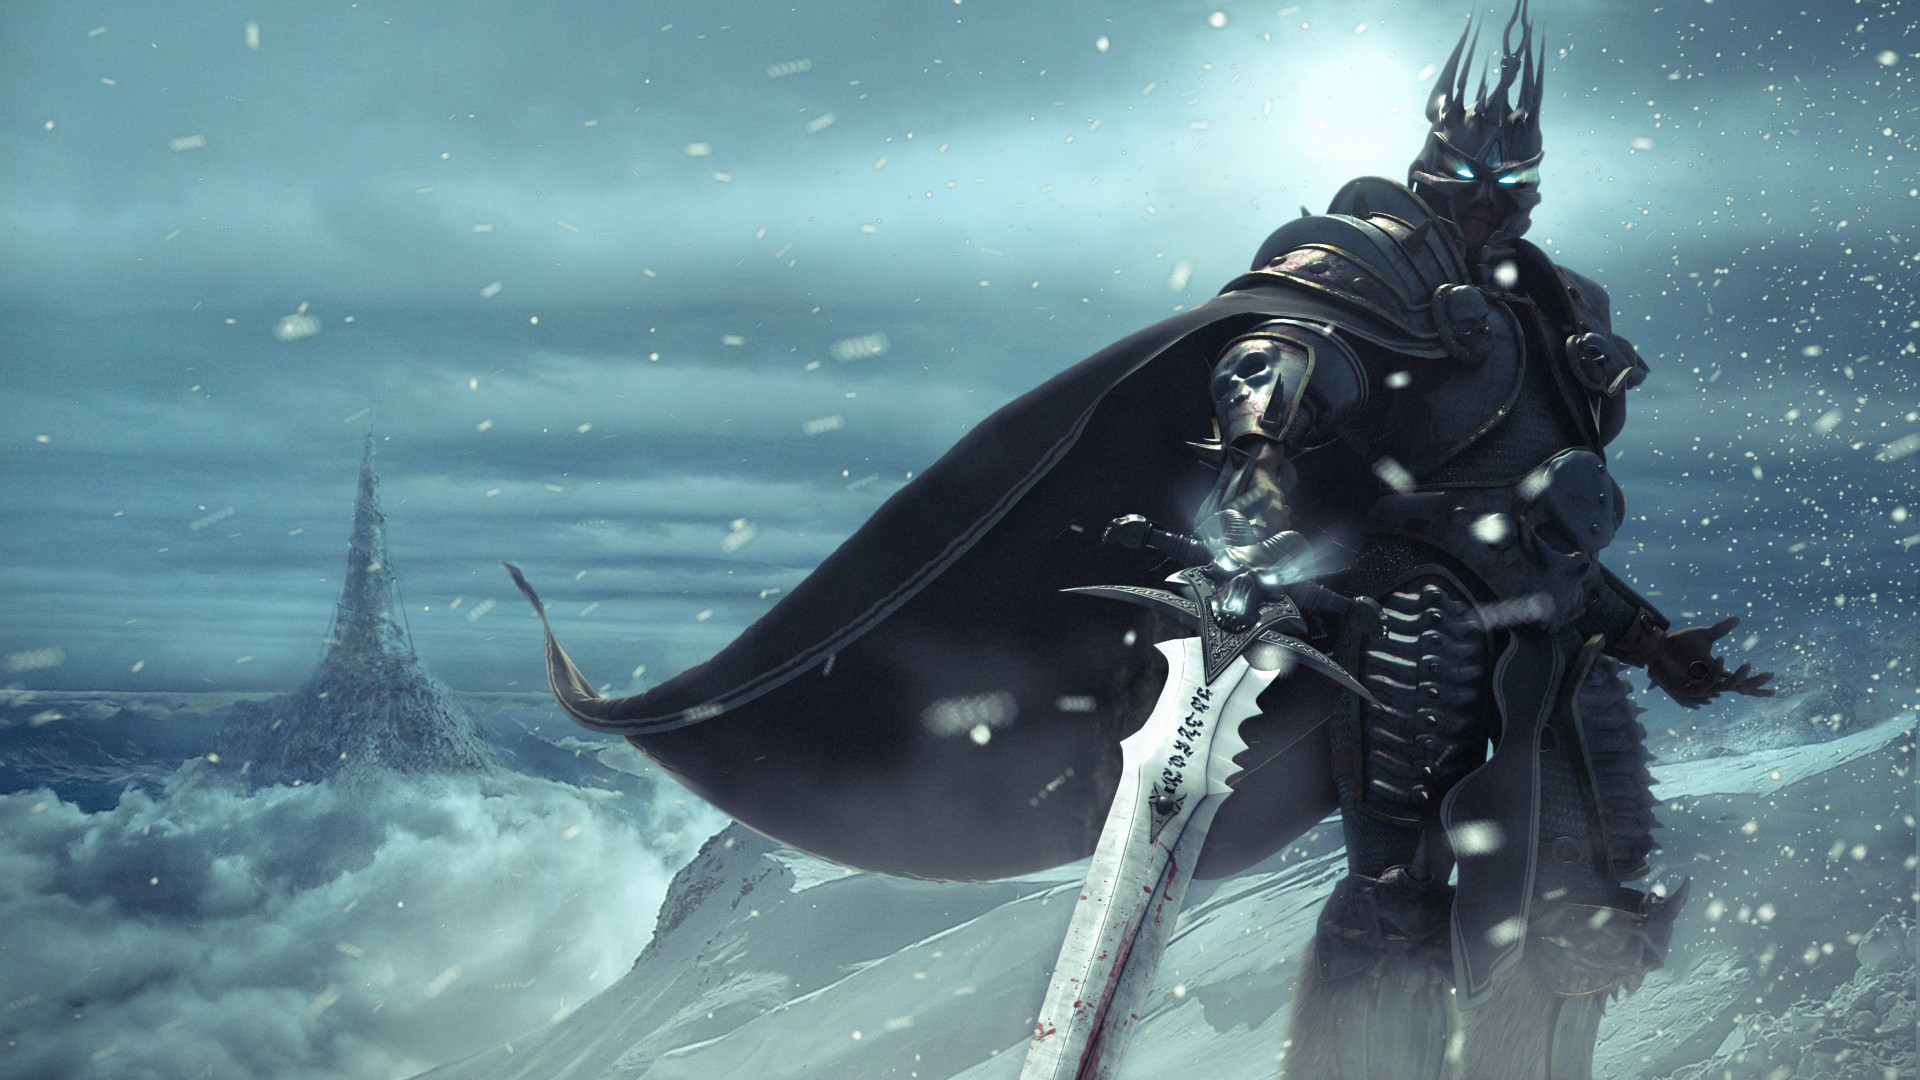 1920x1080 World of Warcraft Wrath of the Lich King wallpaper Game